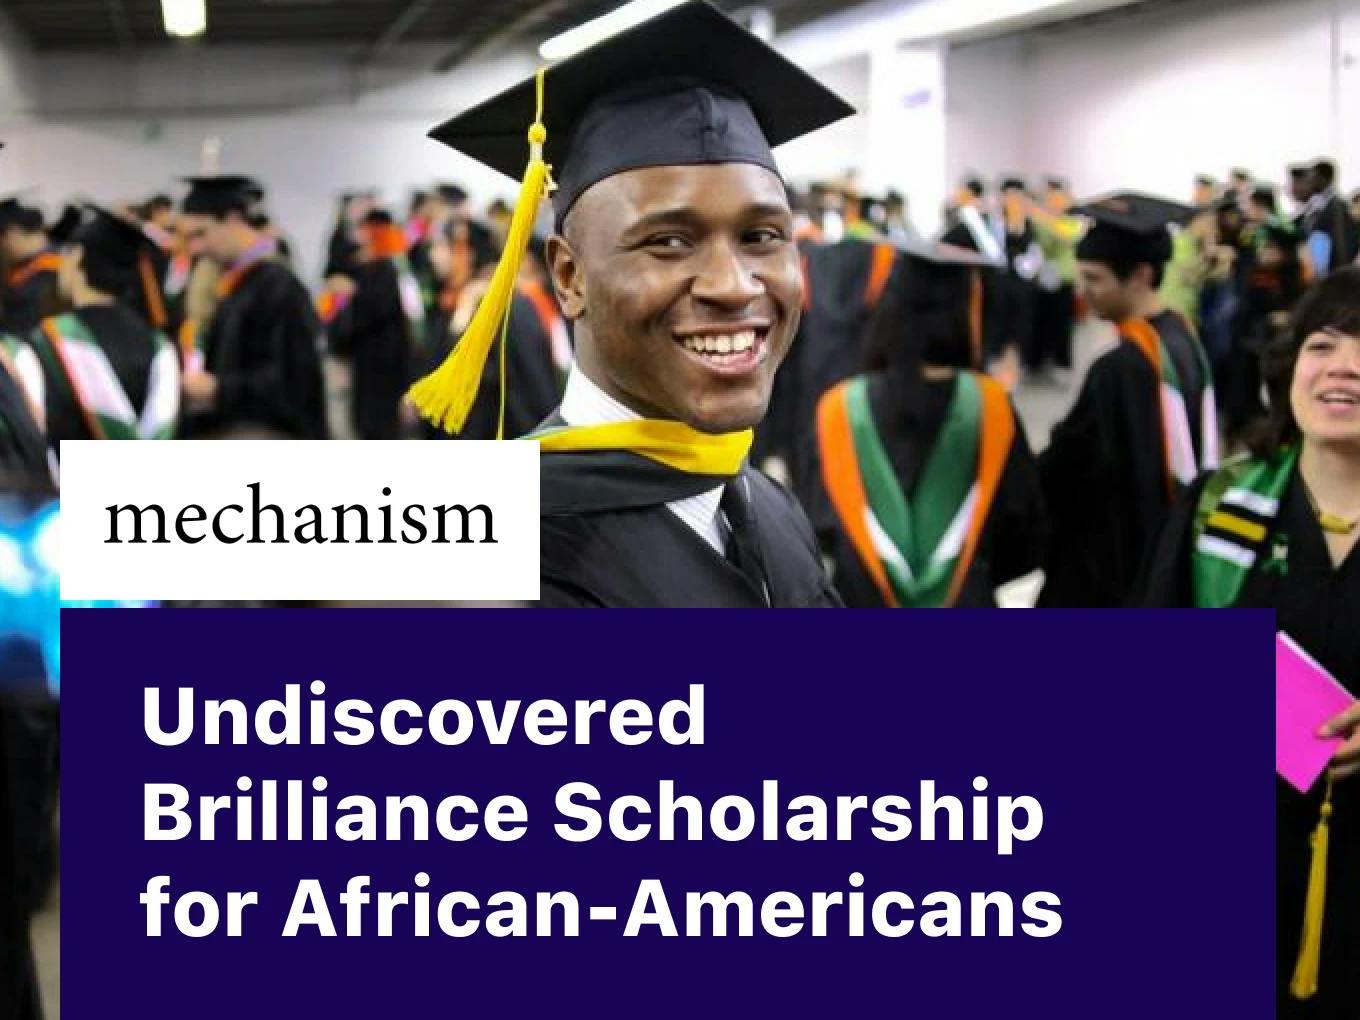 Undiscovered Brilliance Scholarship for African-Americans